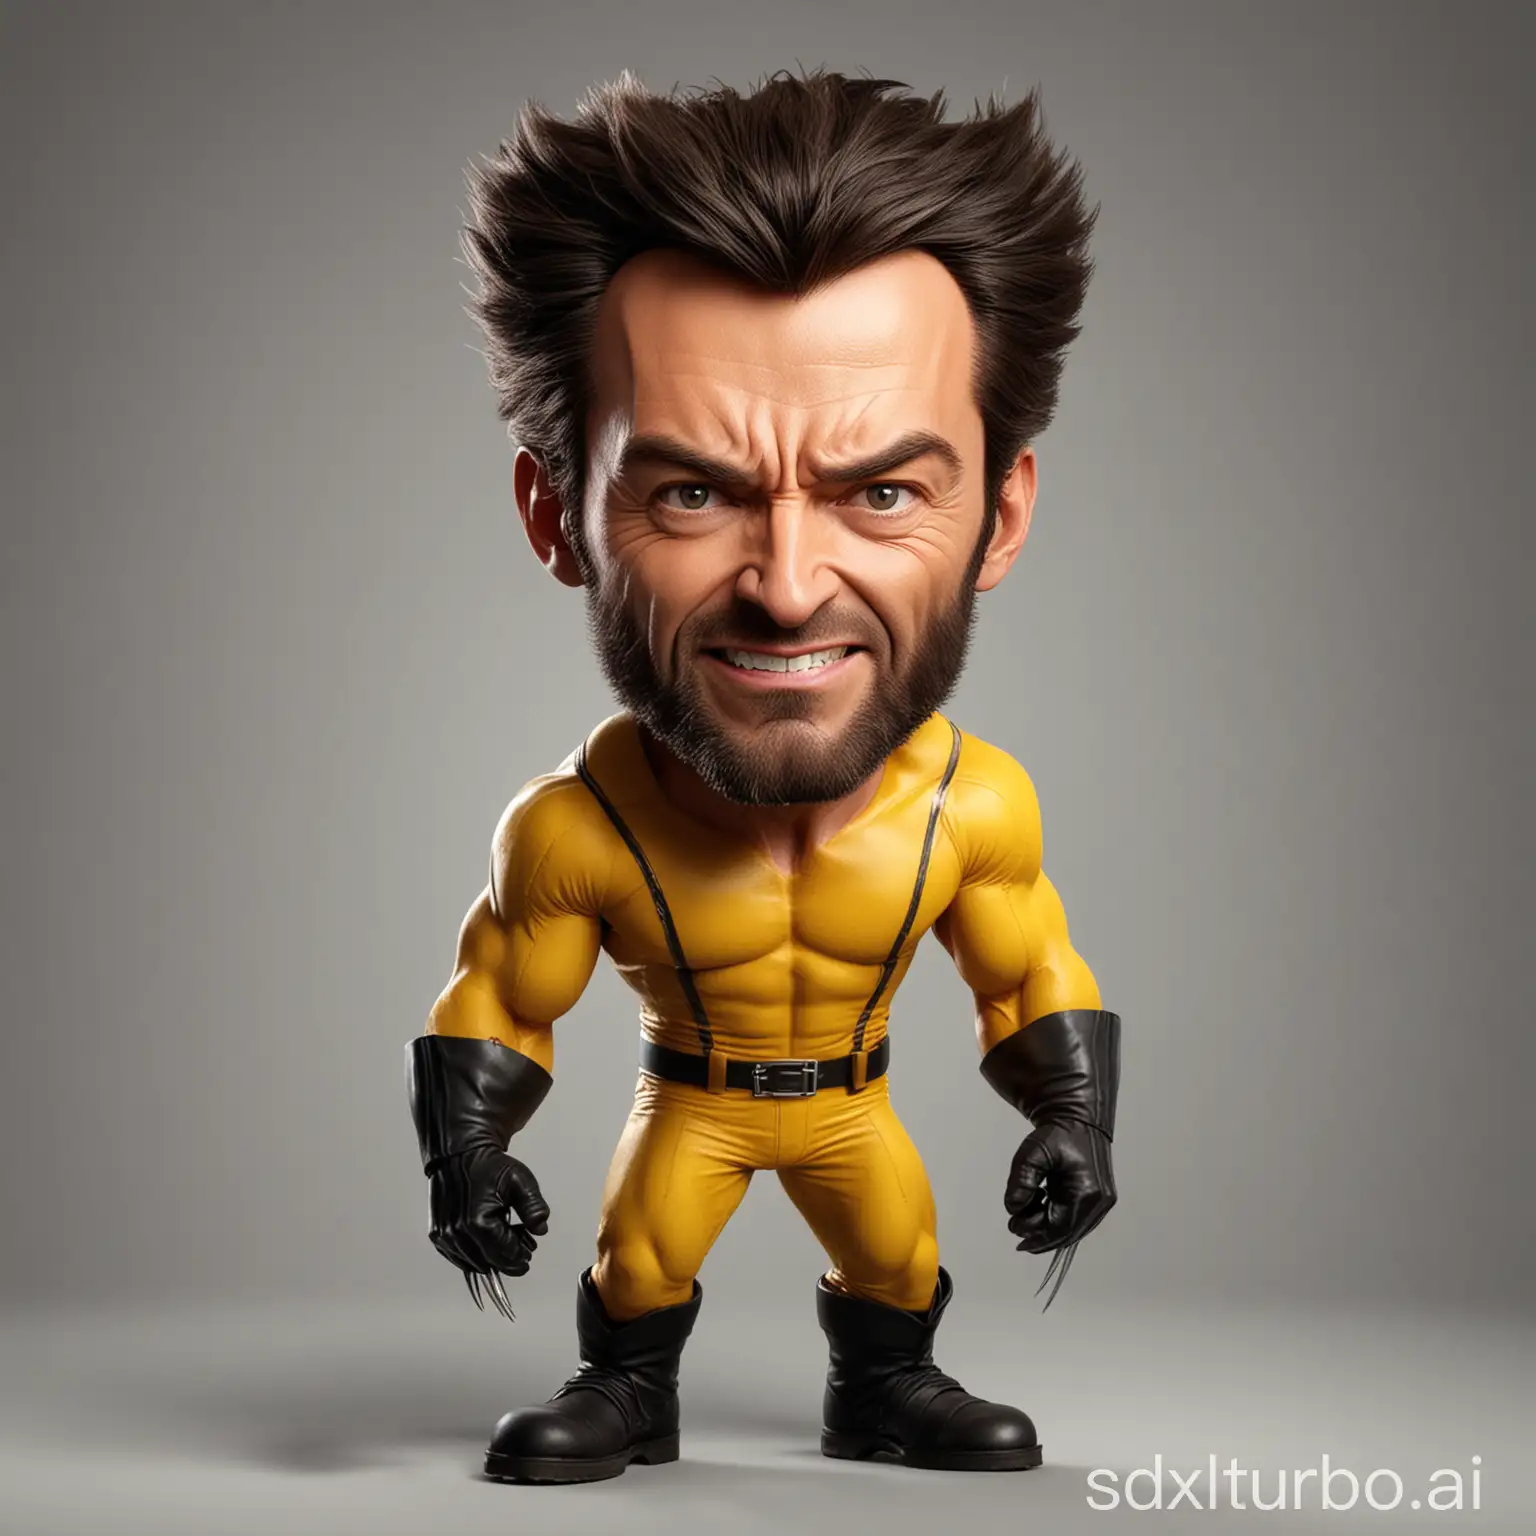 head to toe cartoon caricature of hugh jackman  as wolverine (((without mask))) in yellow classic costume, exageration, big head caricature style, full body view, xmen movie scene film background, high quality, best quality